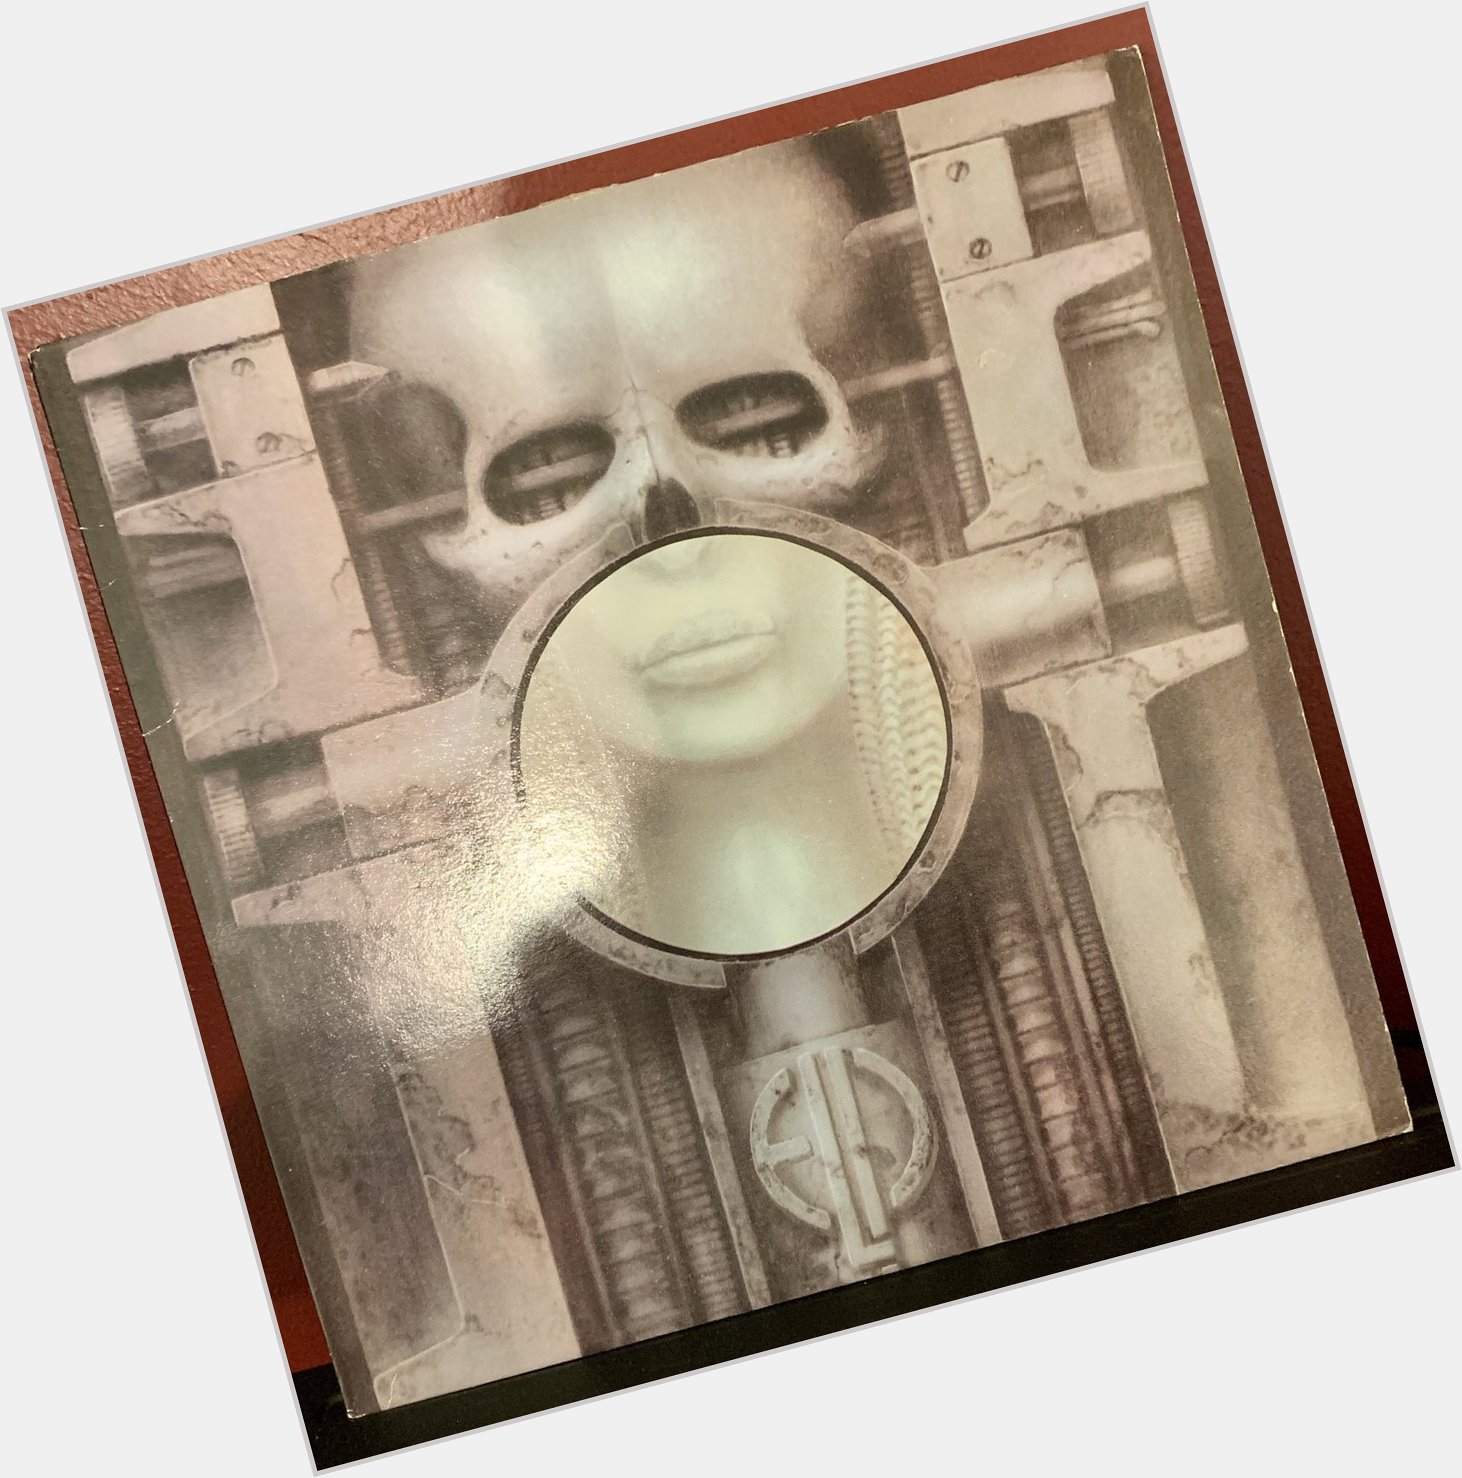 Now Playing ~ Brain Salad Surgery by Emerson, Lake & Palmer. Happy Birthday to Carl Palmer. 